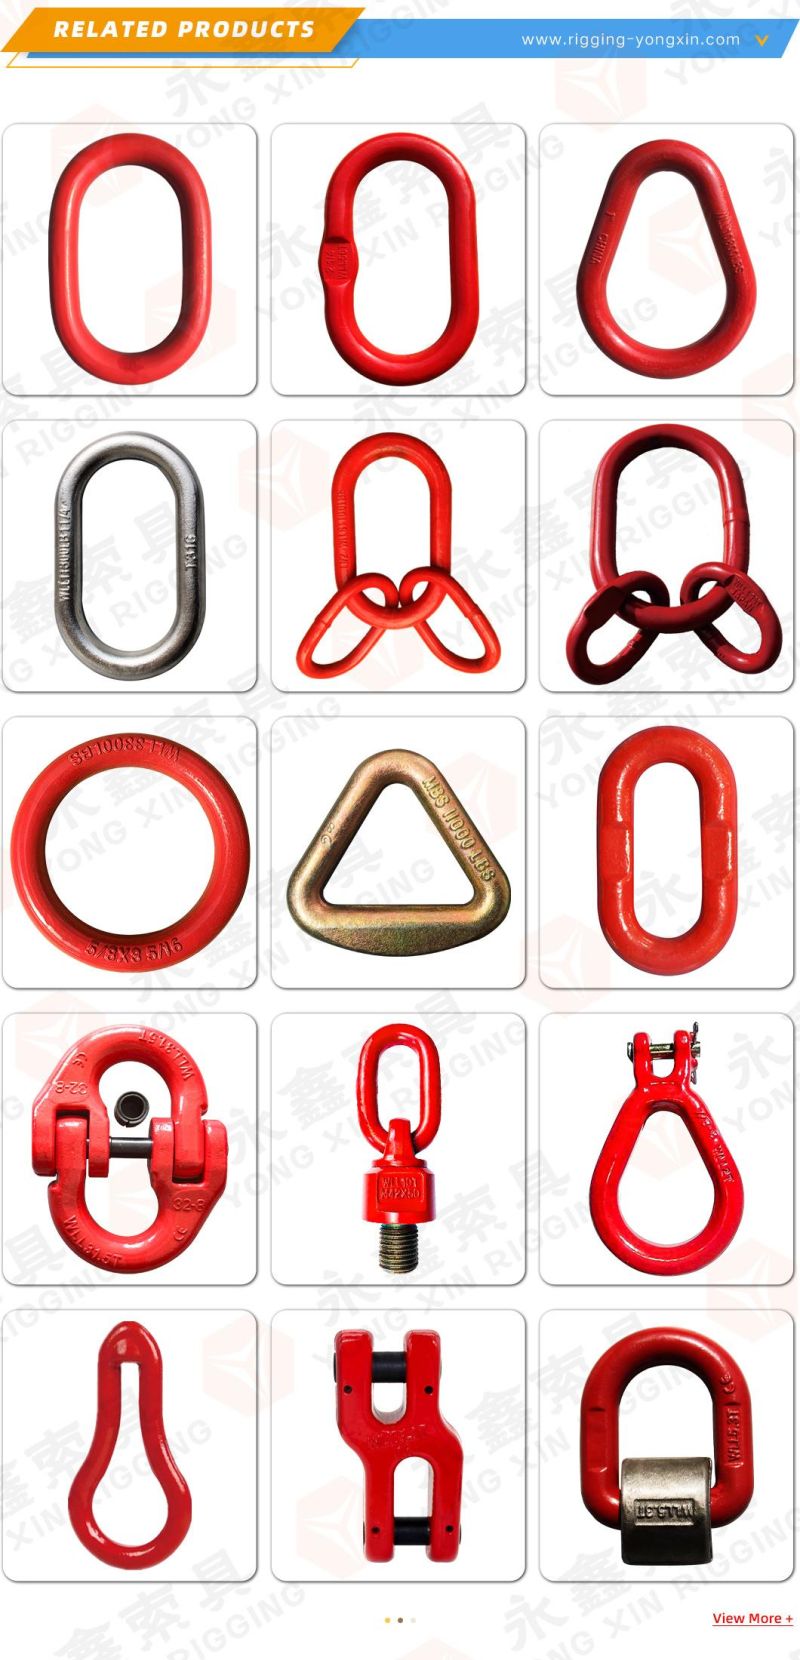 Master Link European Type Alloy Steel Forged G80 Welded Chain Master Link